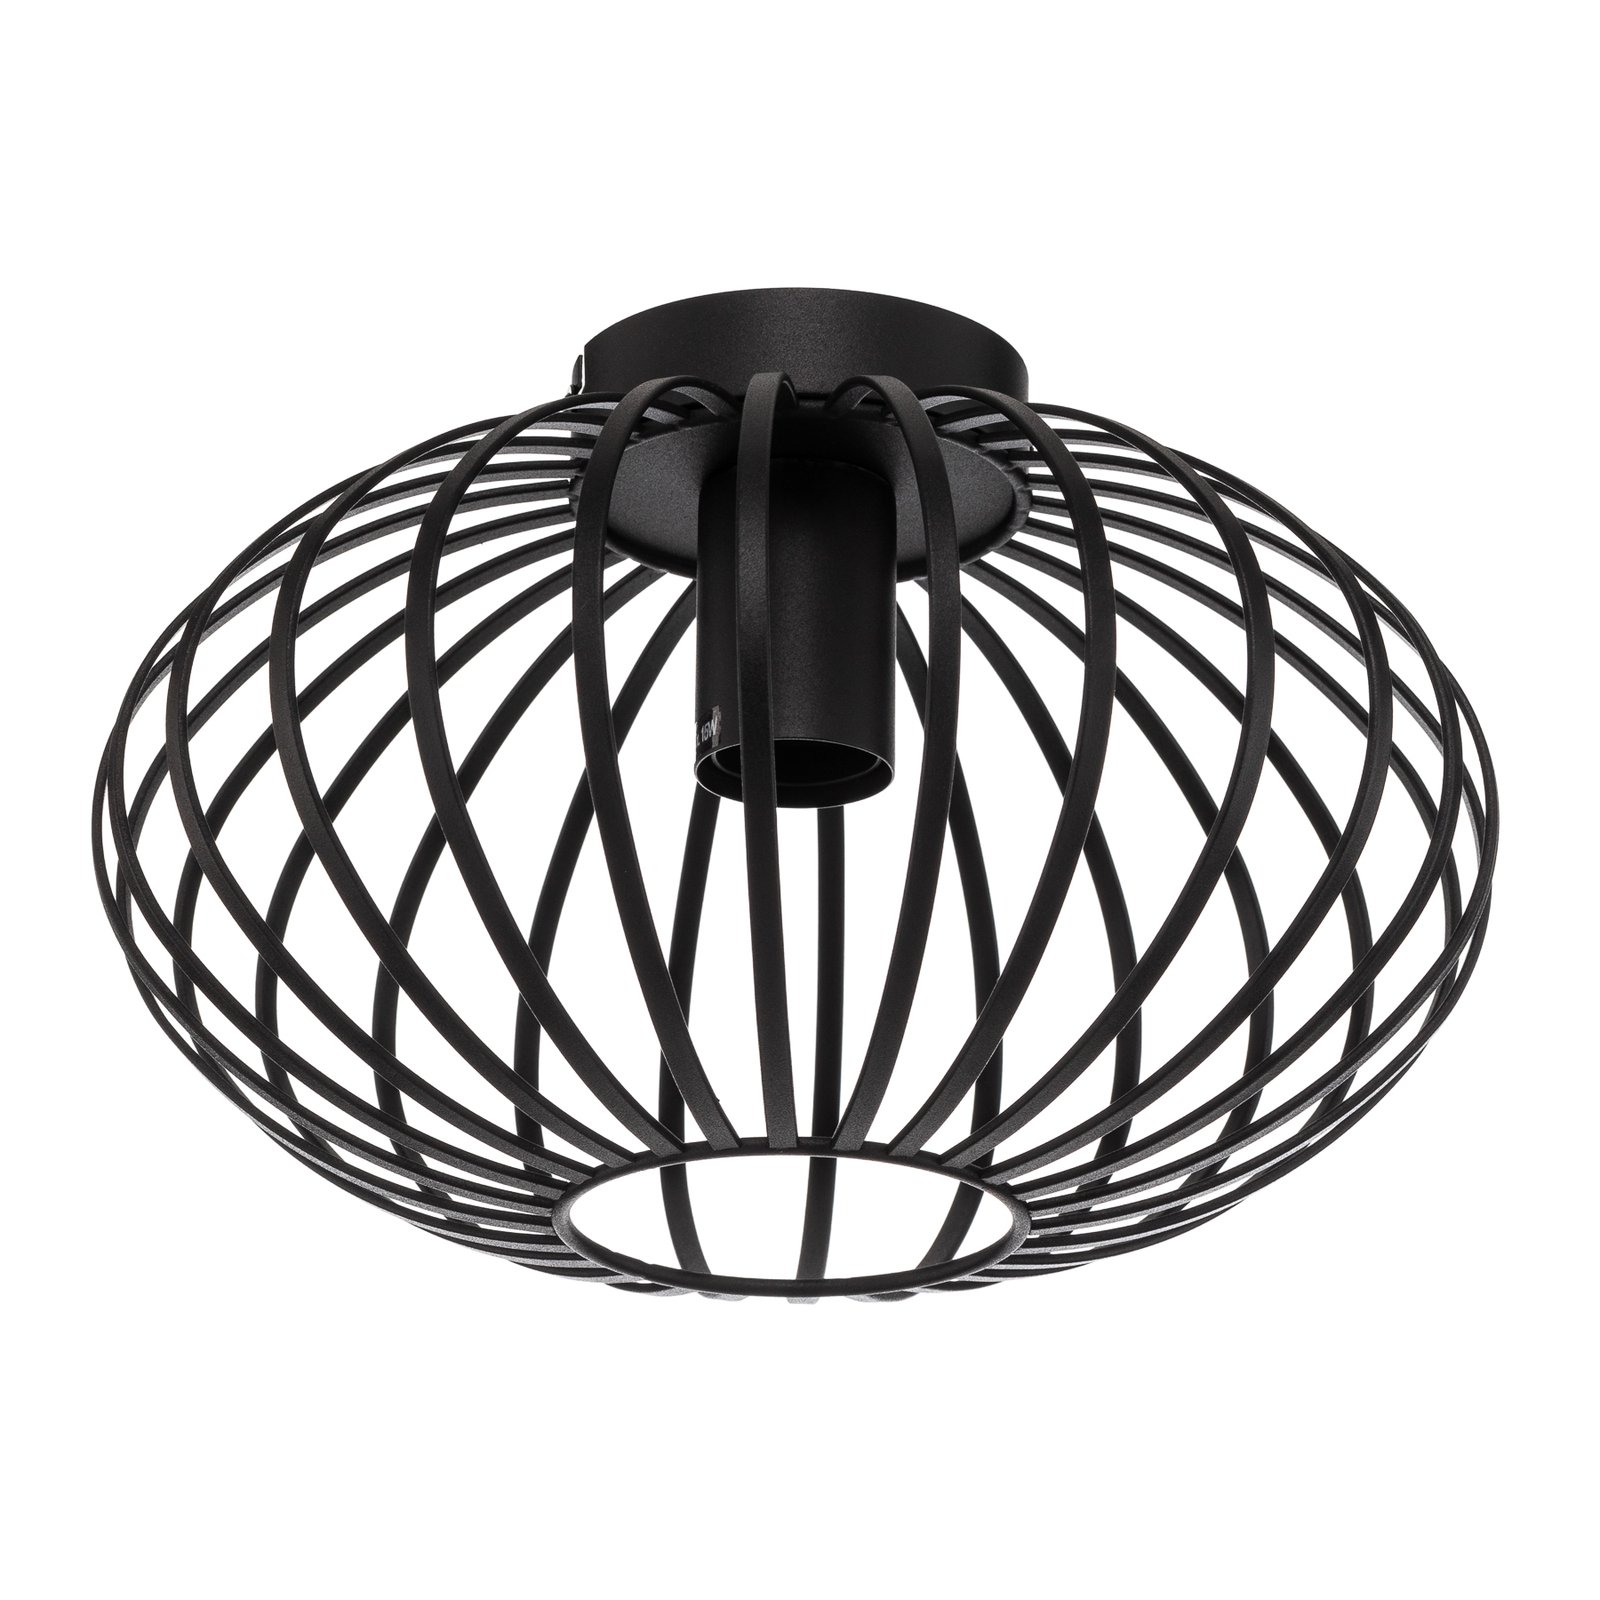 Lindby Maivi ceiling light, black, 30 cm, iron, cage